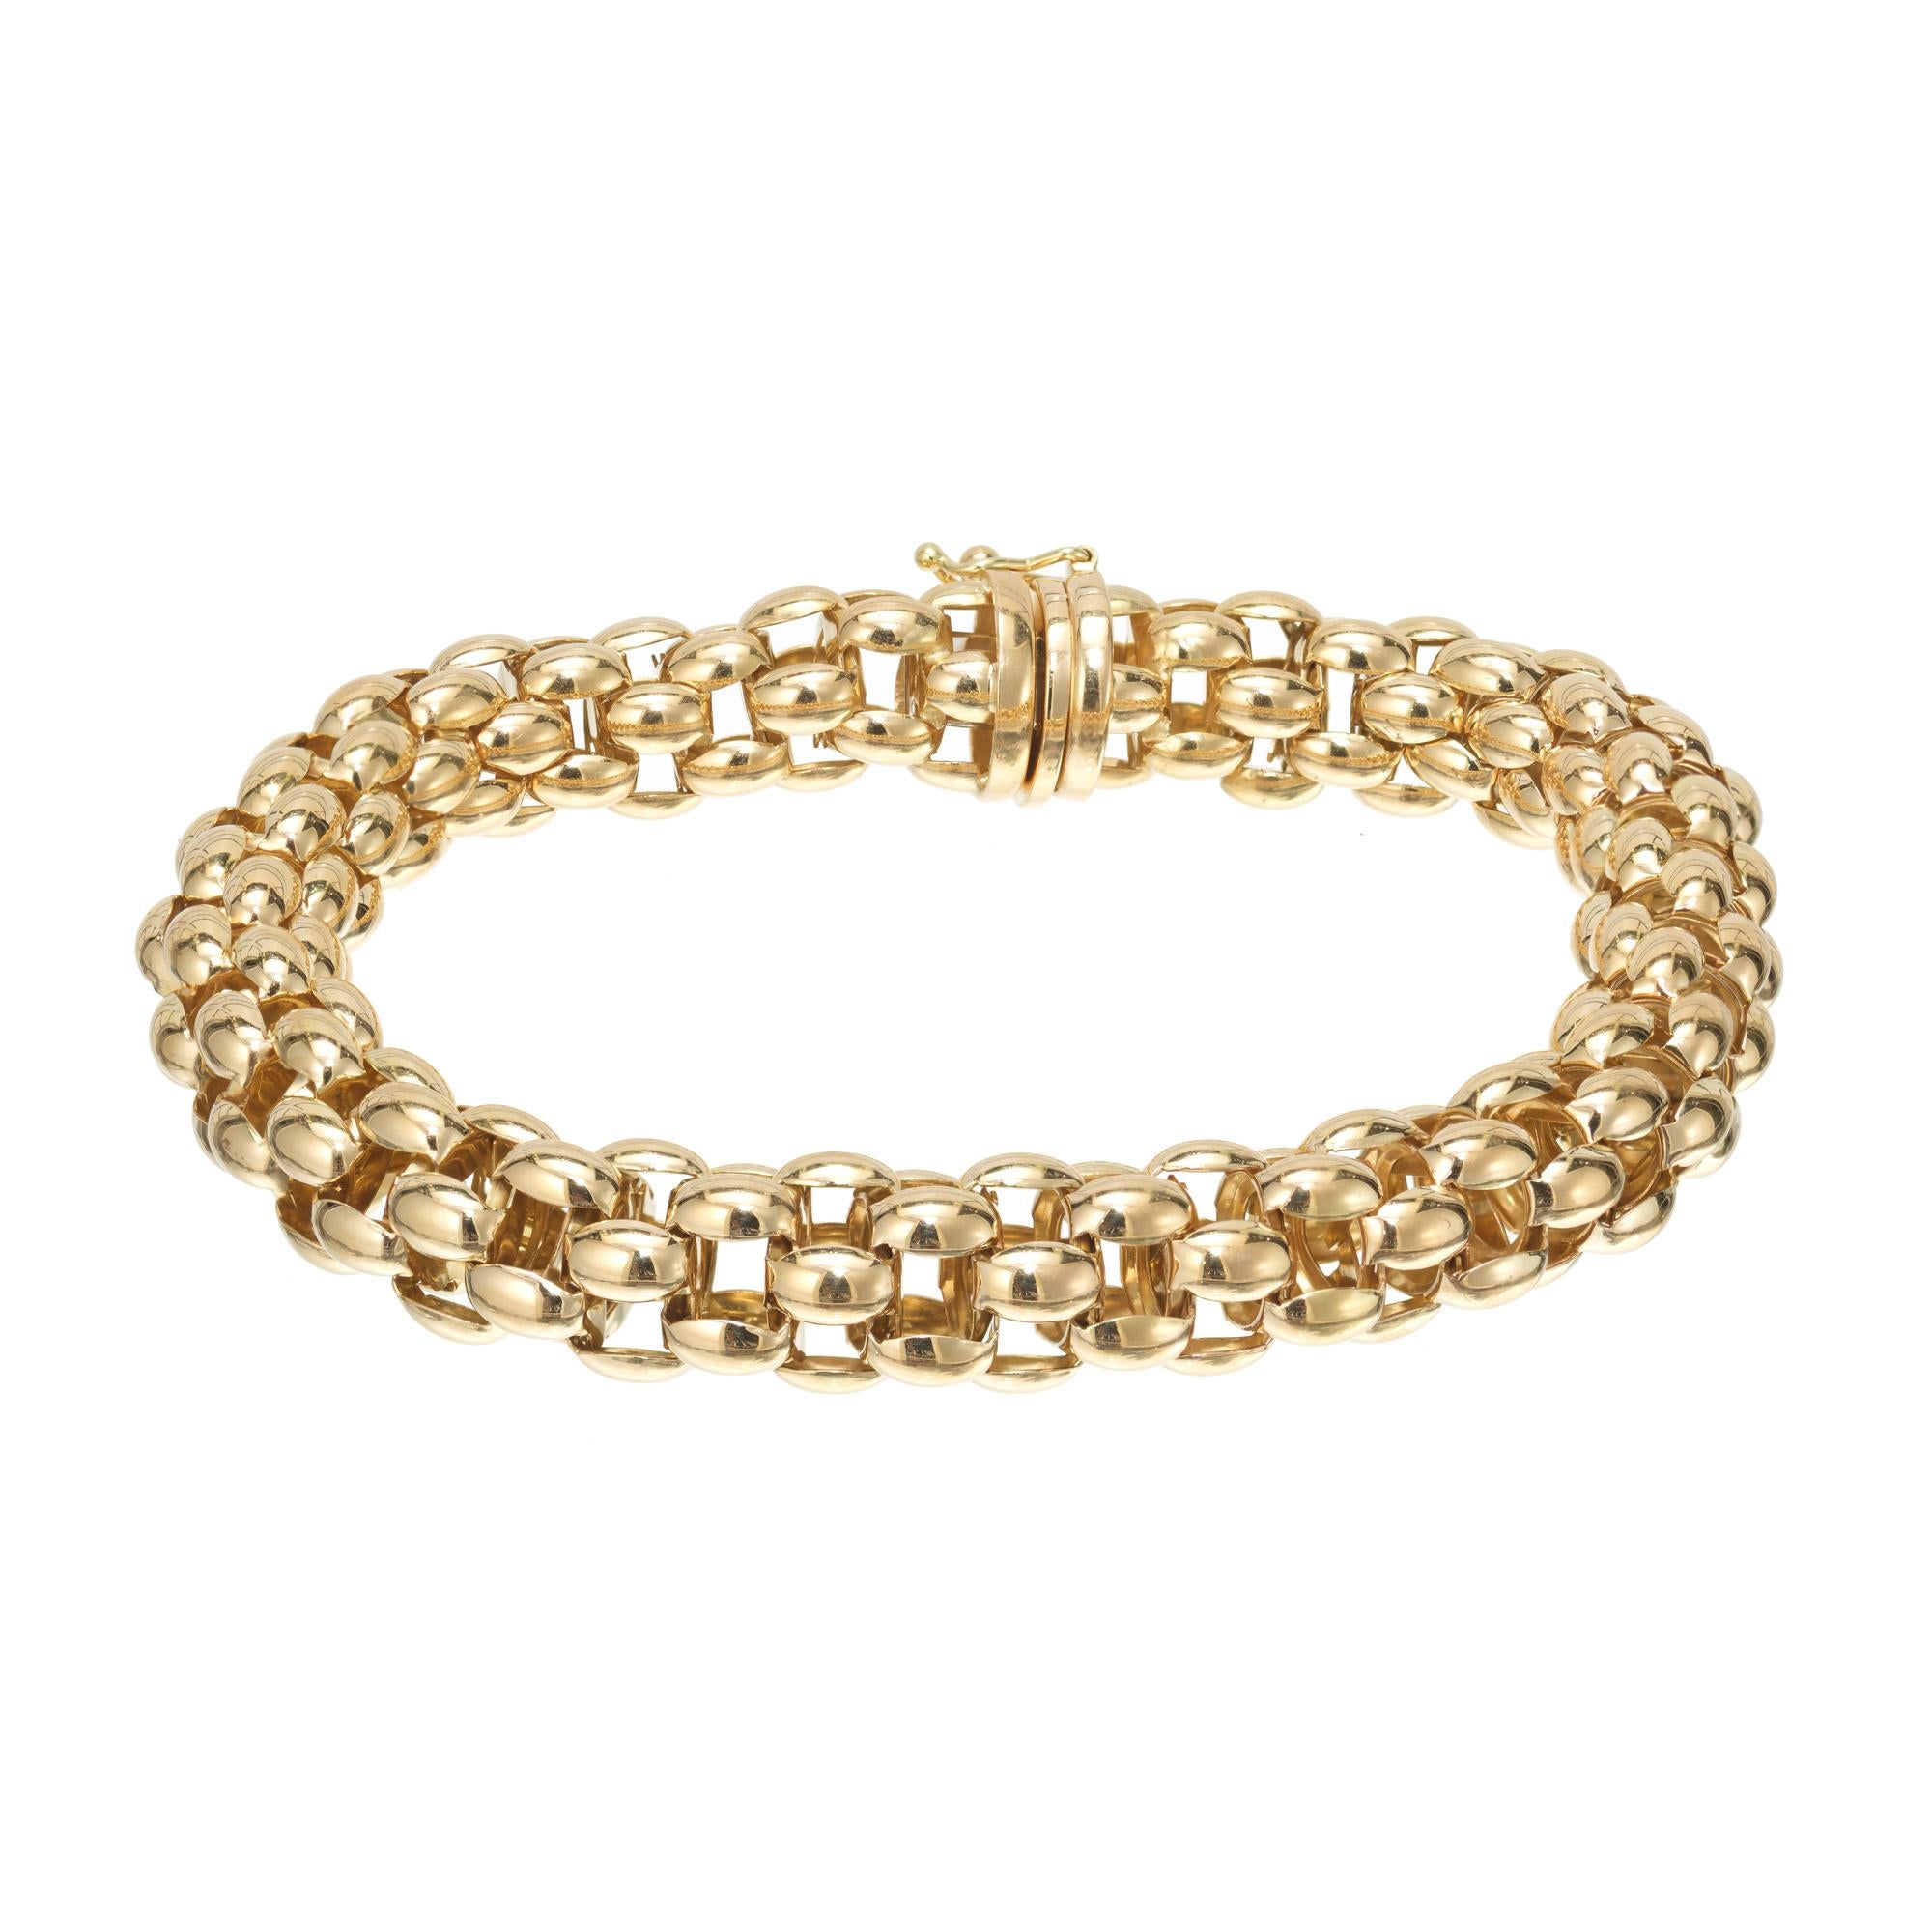 Stunning 18k yellow gold 10mm Italian link 3D bracelet. Highly detailed interlocking oval links forming a circular, tubular design. 8.5 inches in length. High polish flexible links. Secure clasp with a figure eight catch. A beautifully crafted,